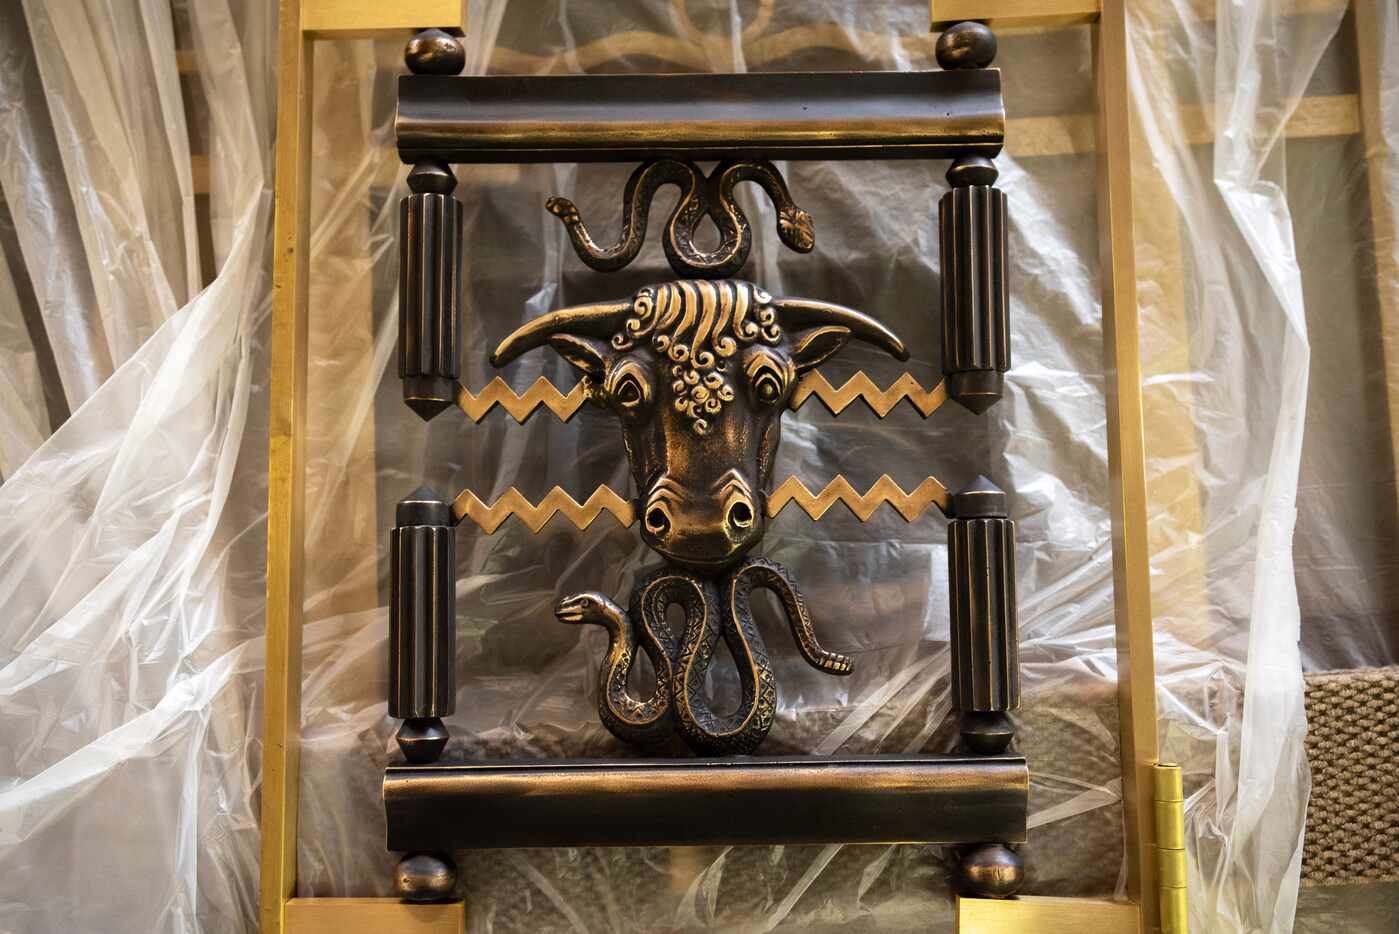 A piece from one of the disassembled entry door grills being restored in Michael van Enter's...